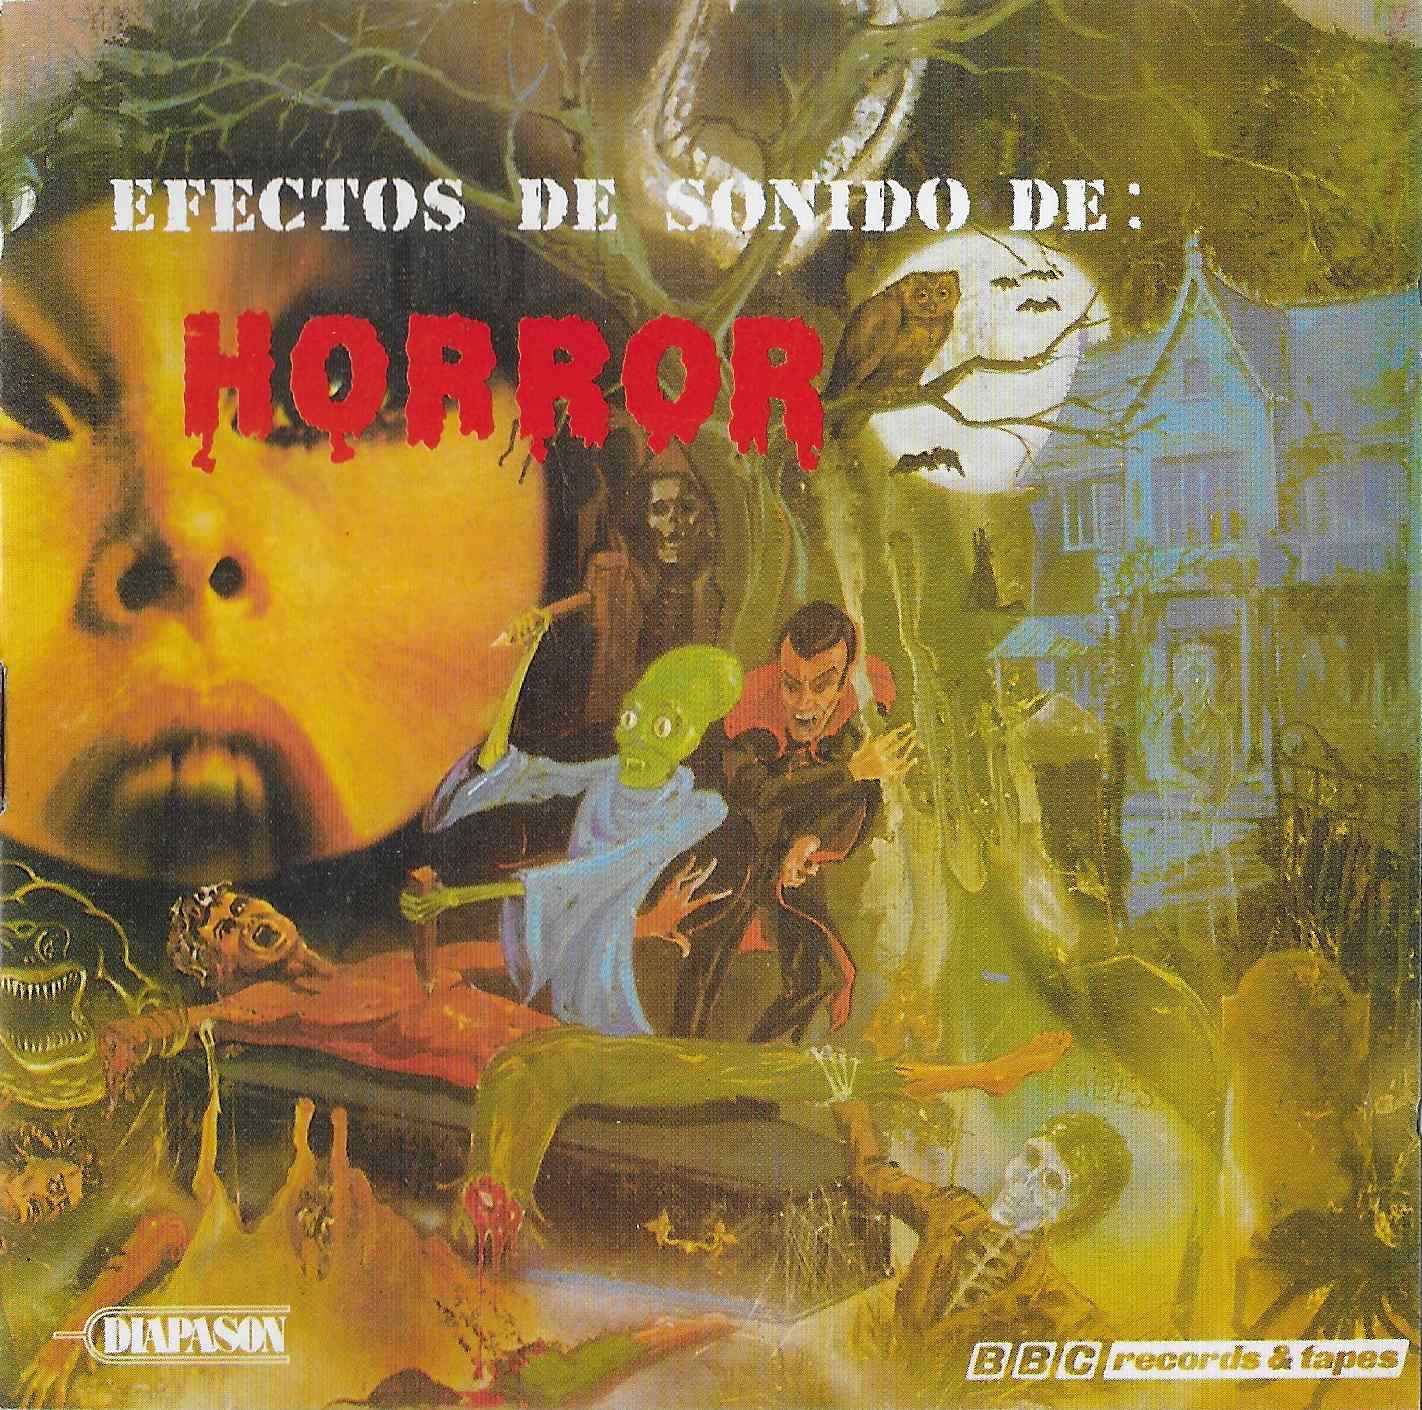 Picture of Efectos de sonido de horror by artist Various from the BBC cds - Records and Tapes library